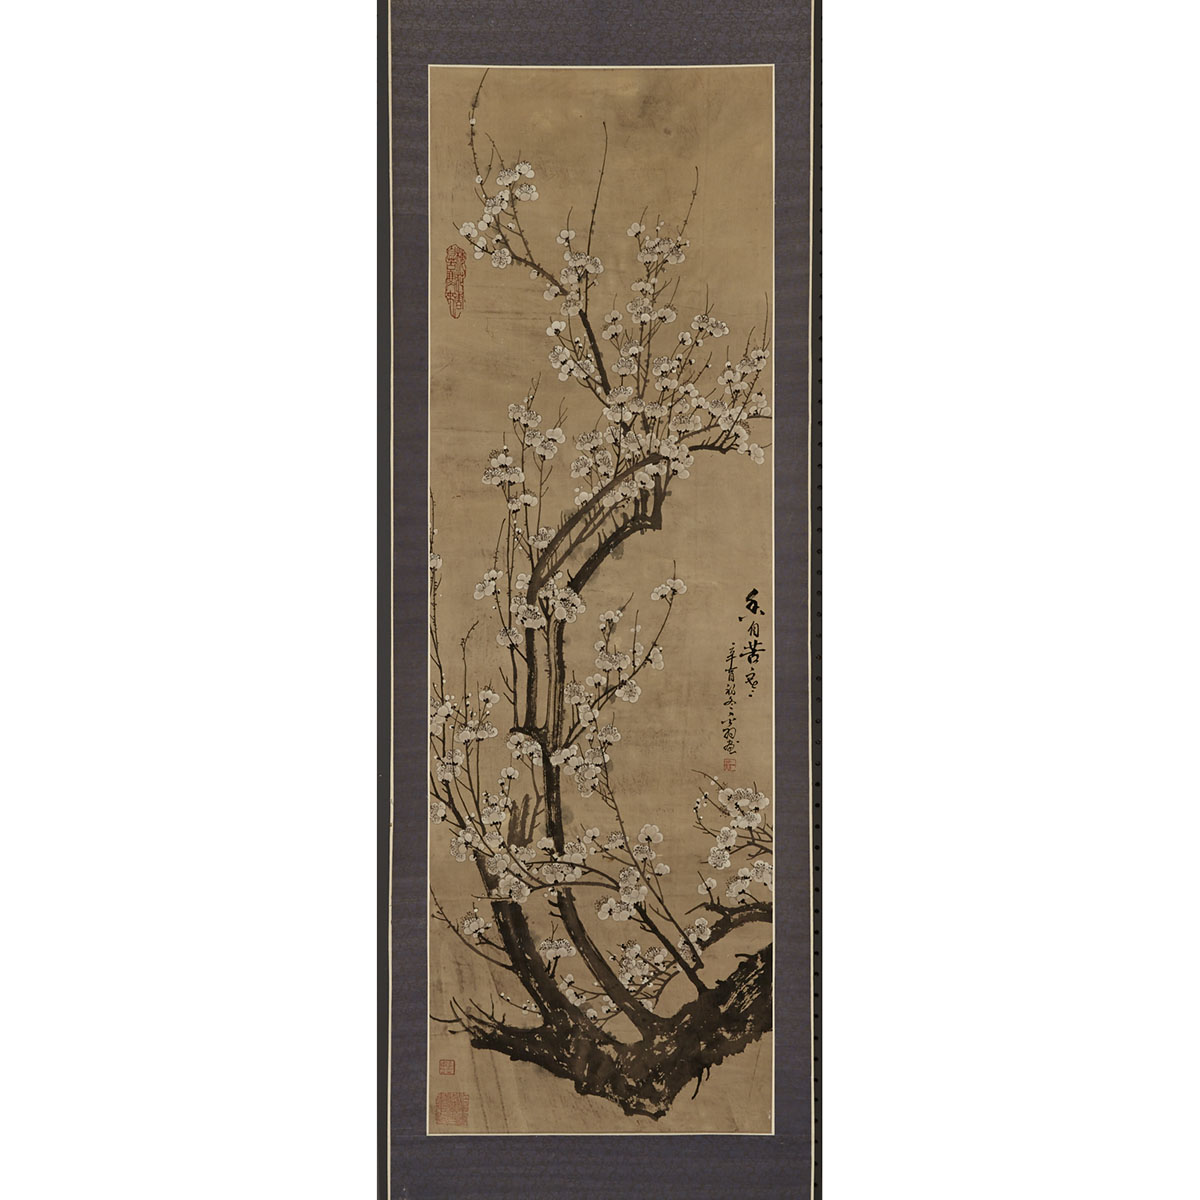 Japanese Scroll Painting